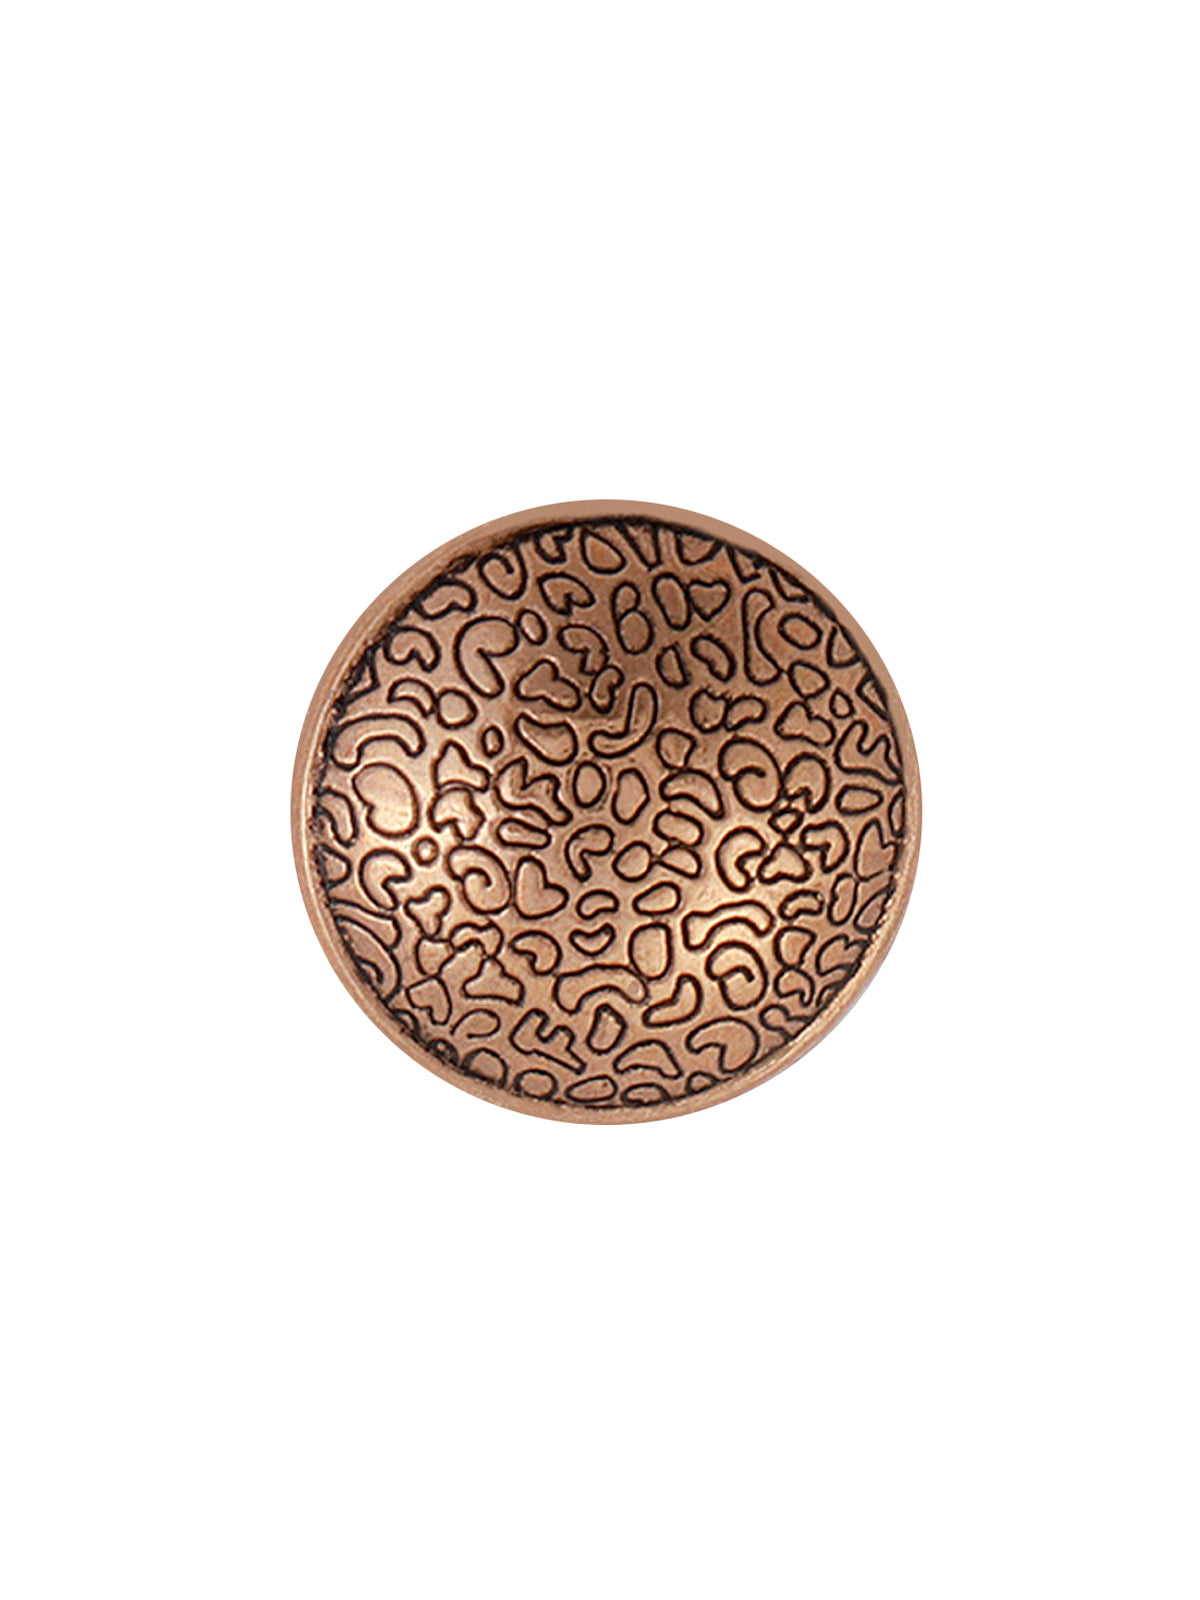 Engraved Design Round Shape Dome Shank Metal Button in Antique Gold Color